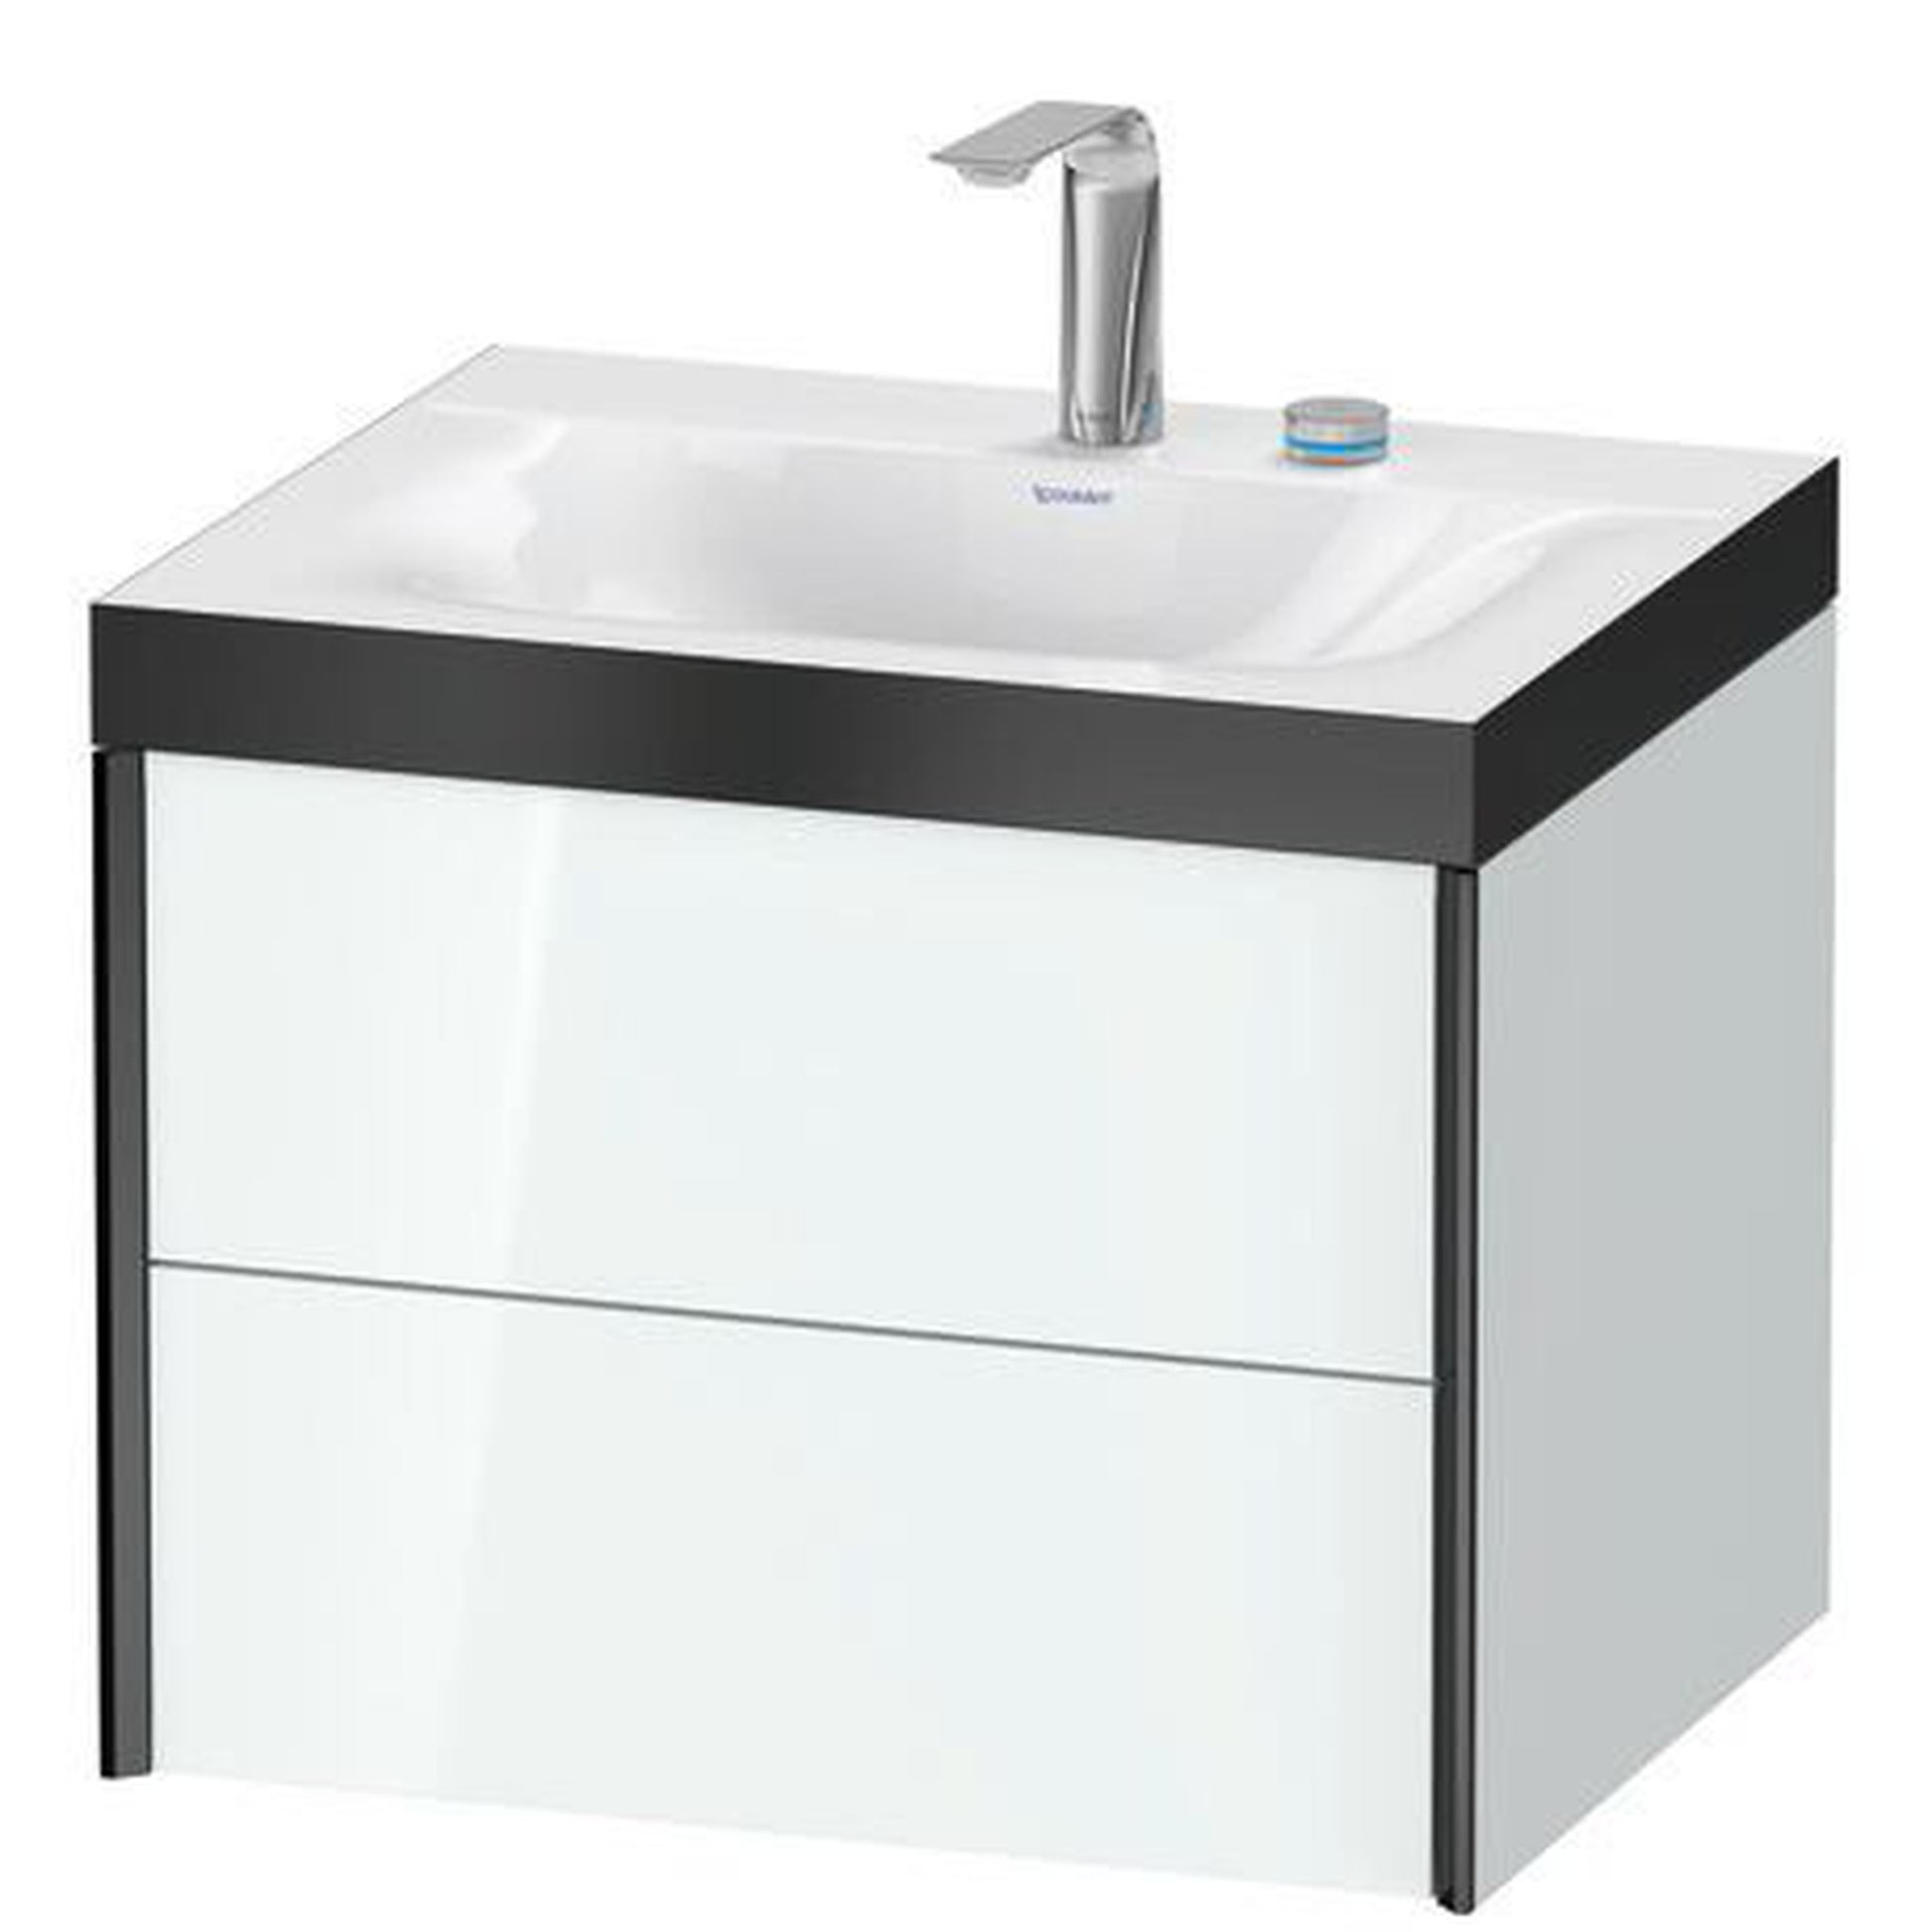 Duravit Xviu 24" x 20" x 19" Two Drawer C-Bonded Wall-Mount Vanity Kit With Two Tap Holes, White (XV4614EB285P)